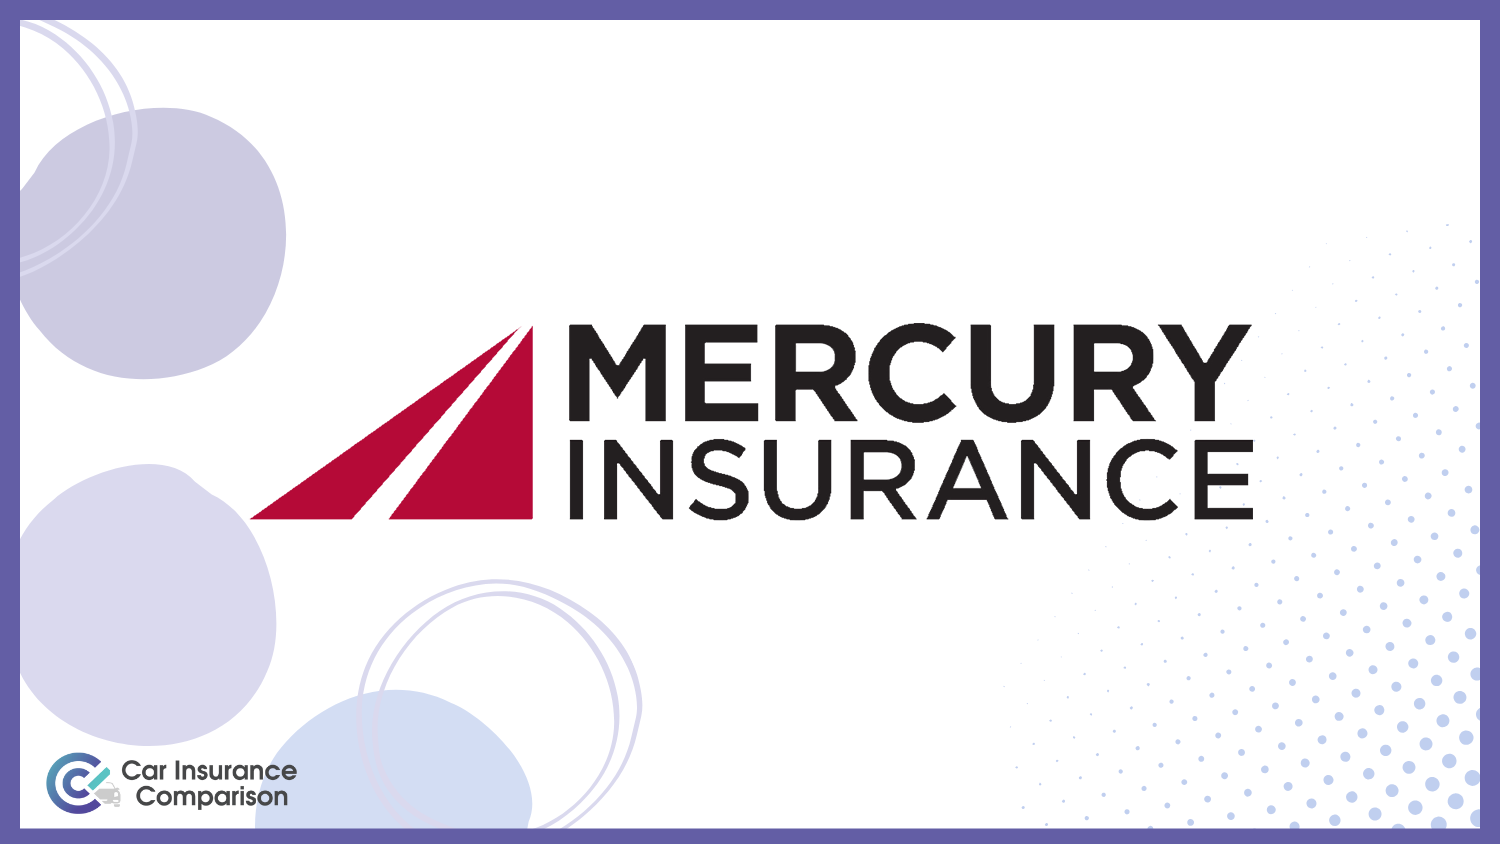 Mercury: Best Car Insurance for a Bad Driving Record